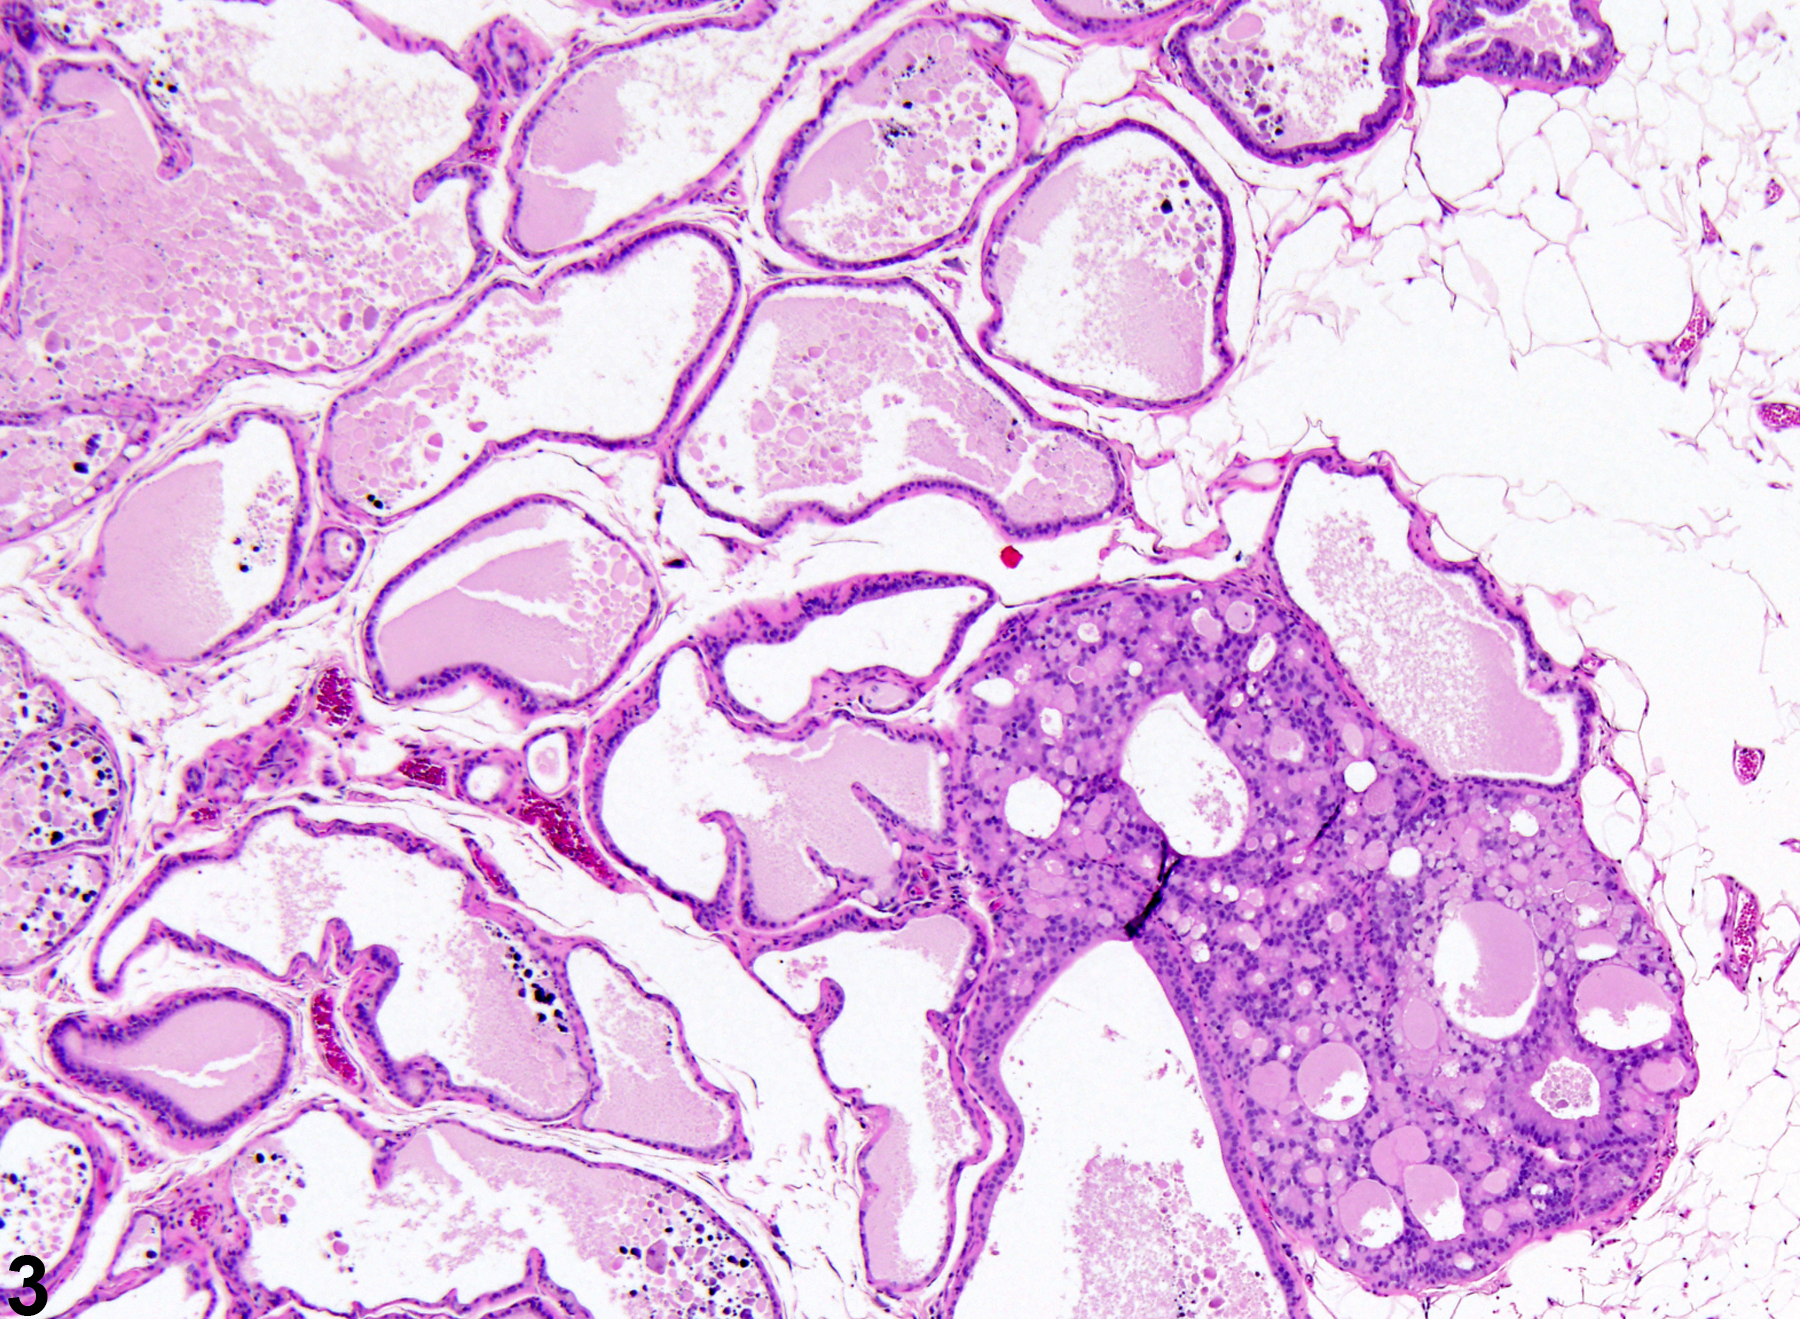 Image of epithelial hyperplasia in the prostate from a male F344/N rat in a chronic study